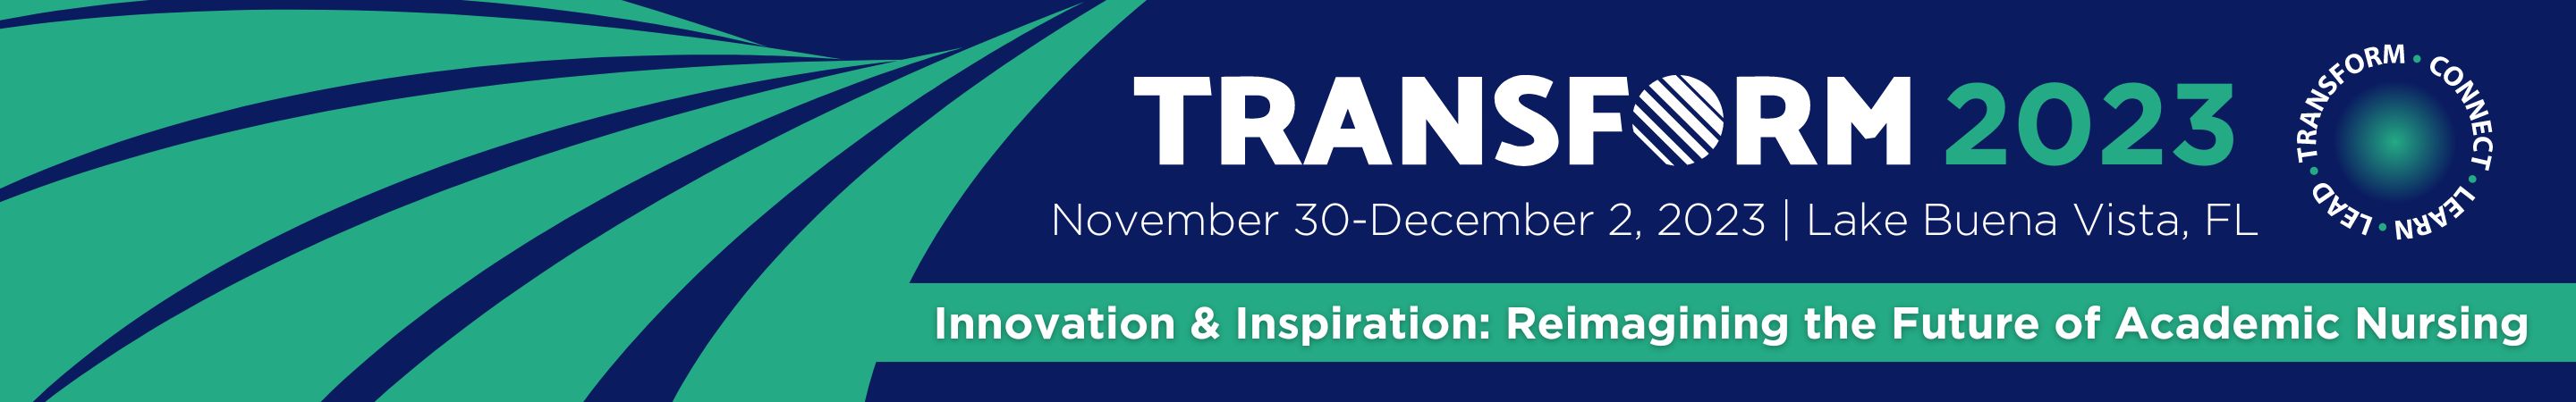 american association of colleges of nursing | the voice of academic nursing | Transform 2023 | Transform. connect. learn. lead